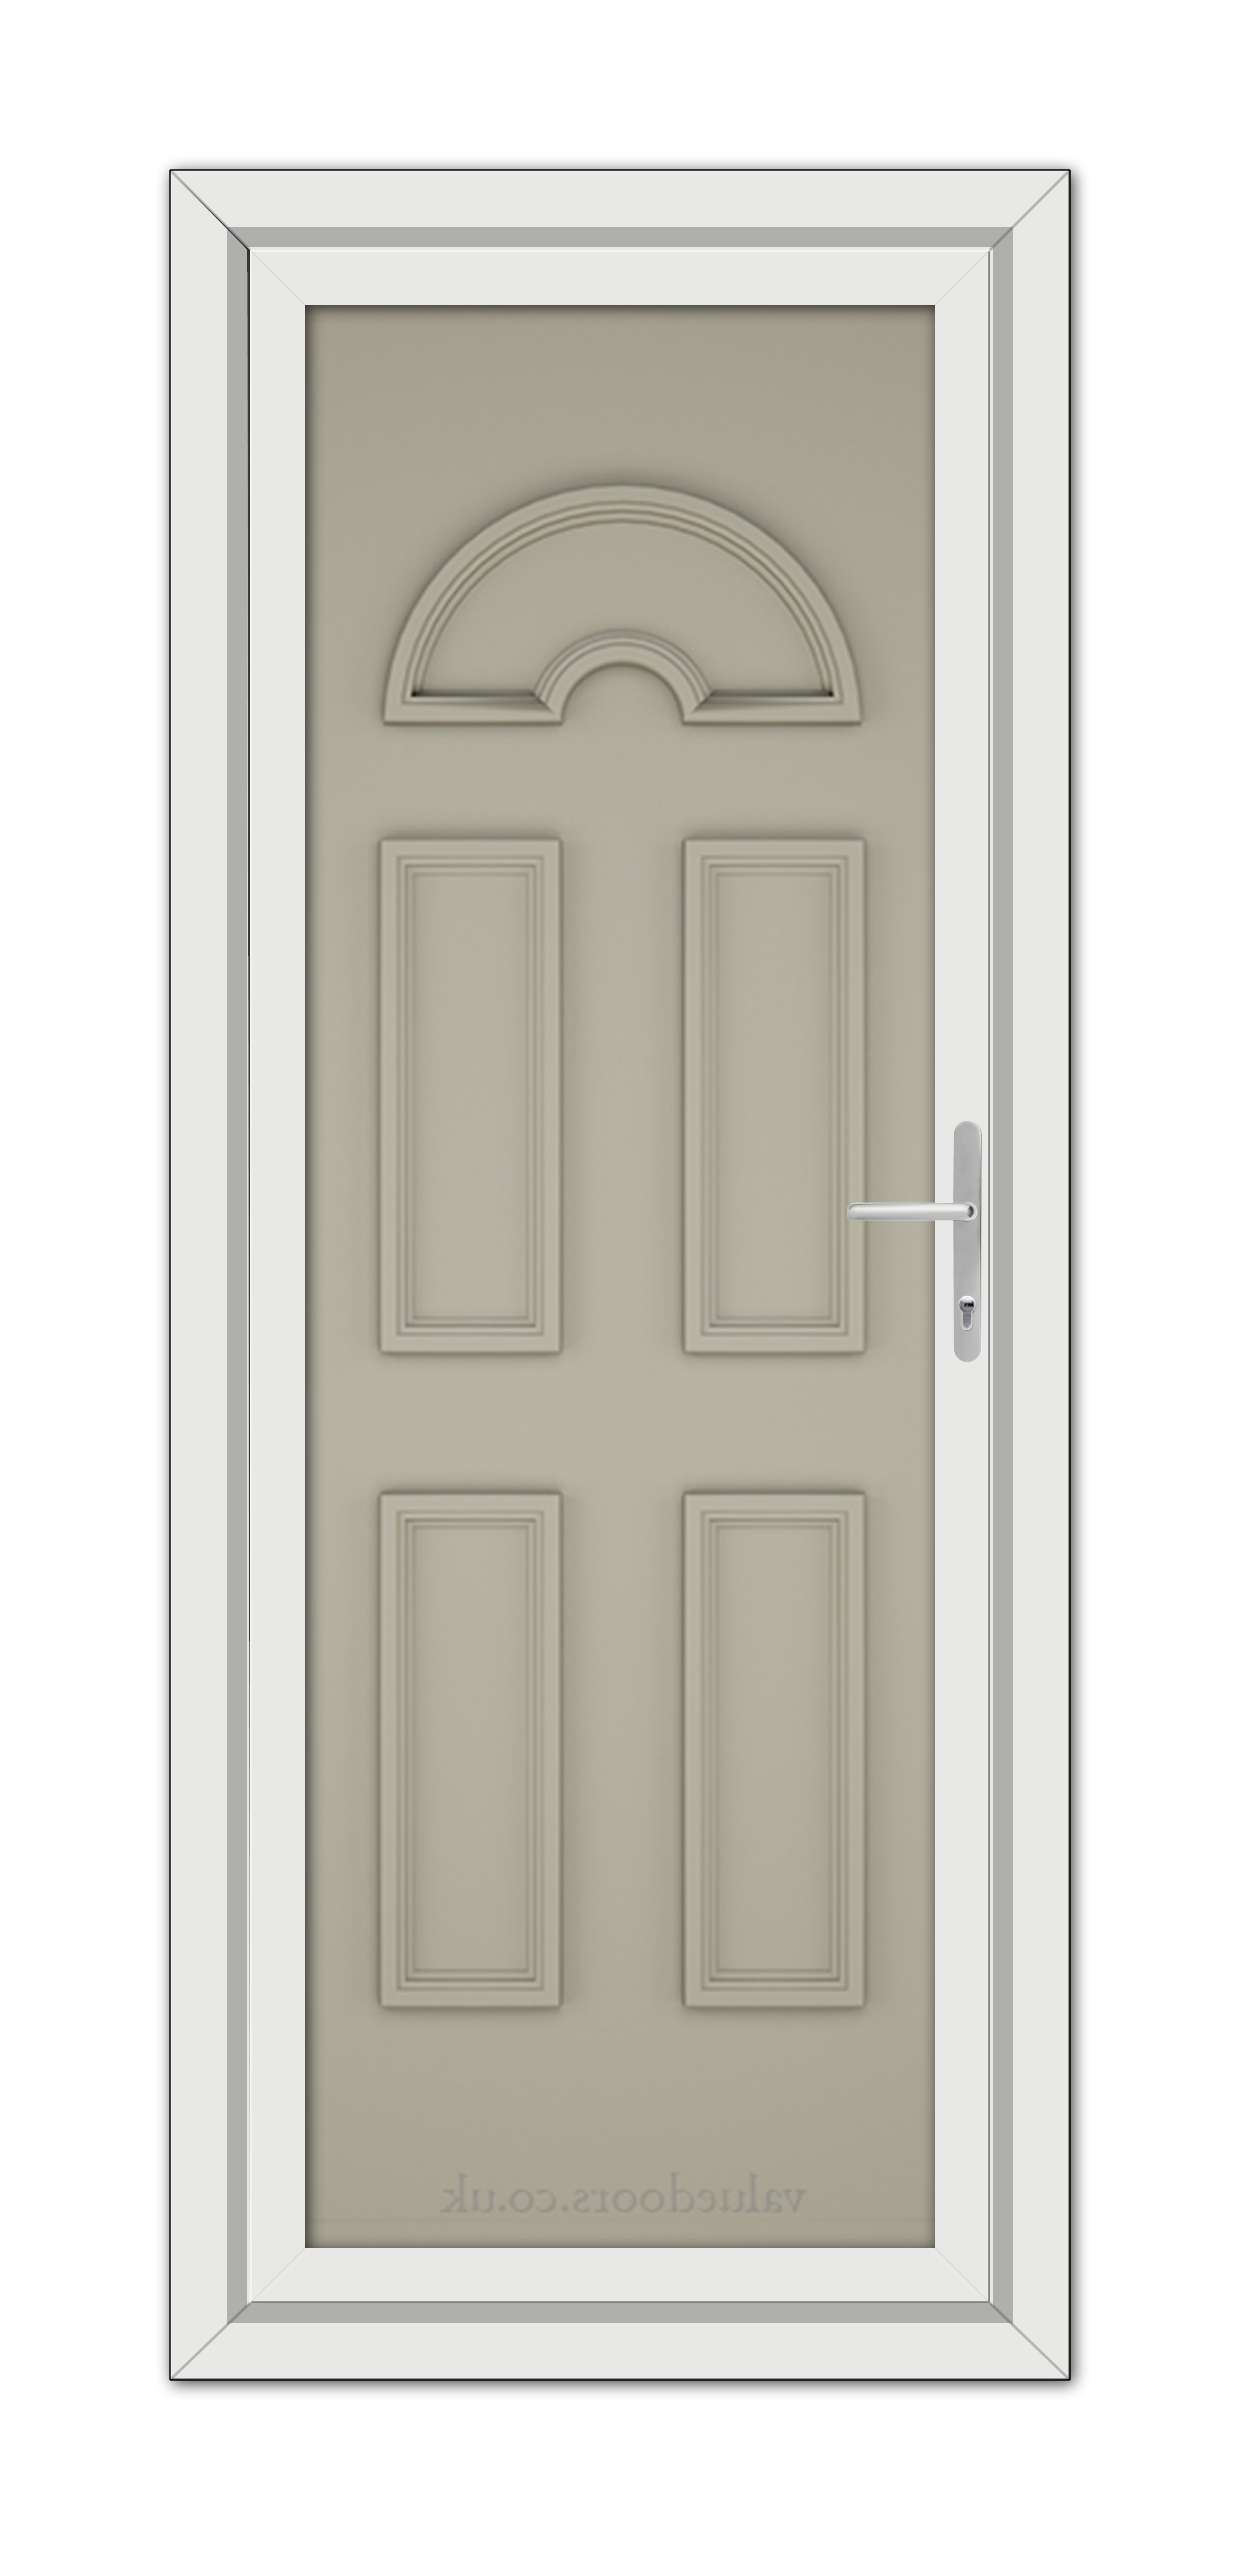 A Pebble Grey Sandringham Solid uPVC Door with six panels and a semicircular translucent window at the top, framed in white with a modern handle on the right.